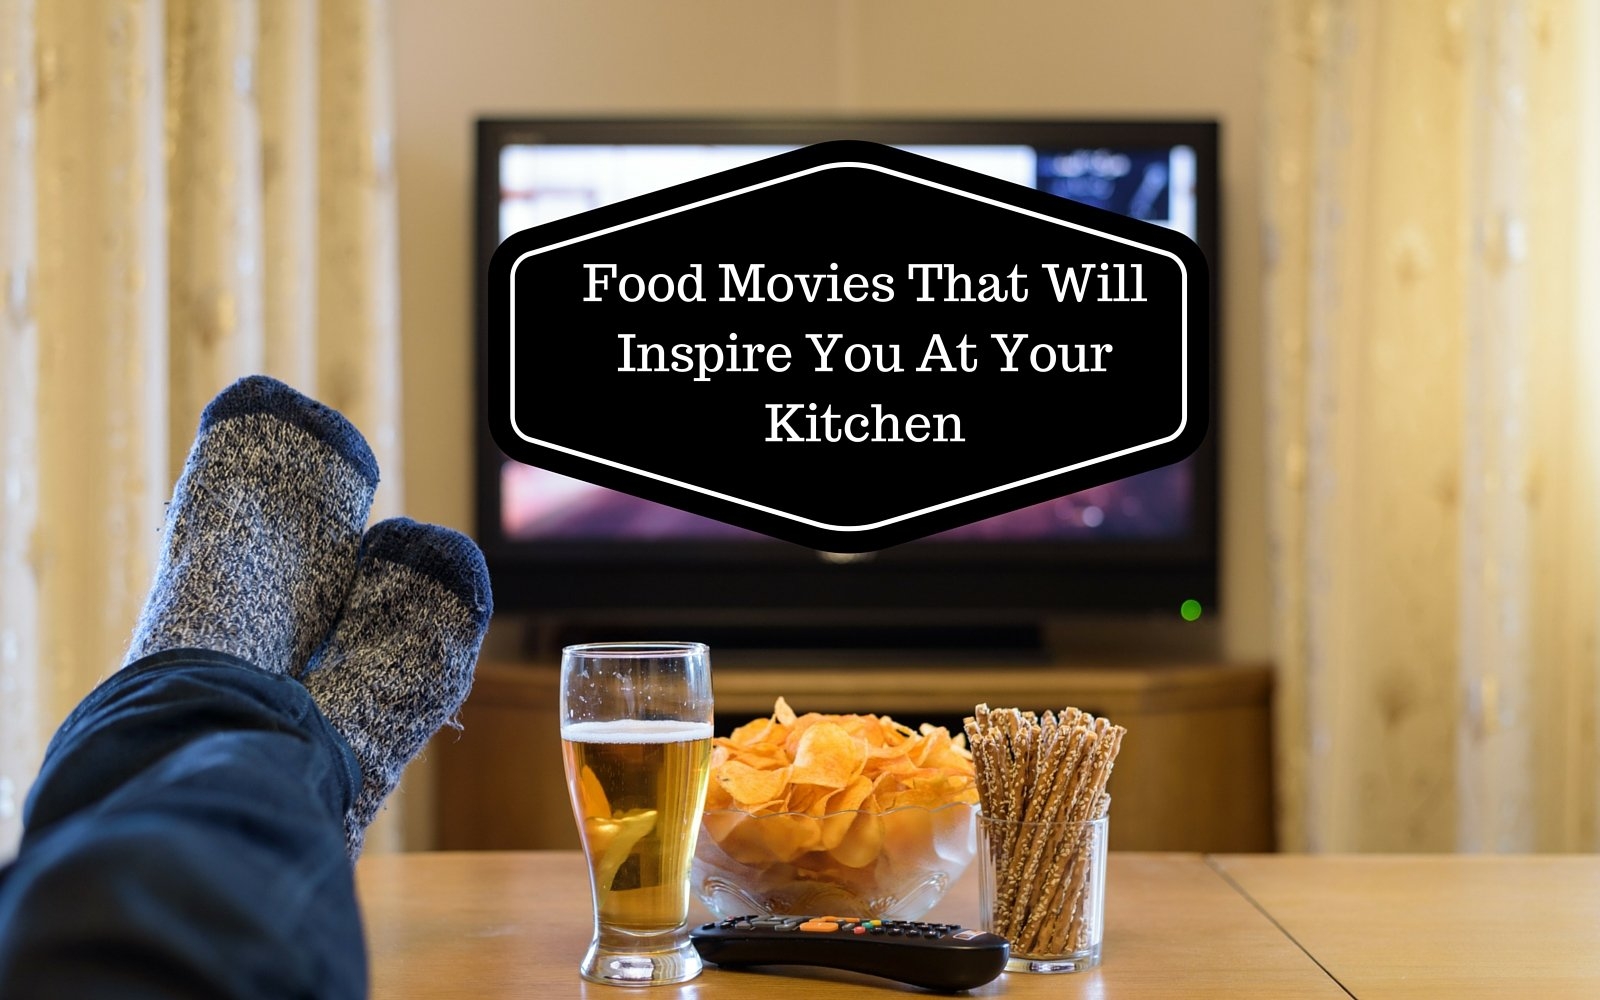 http://www.shutterstock.com/pic-344995319/stock-photo-tv-television-watching-tank-on-street-war-movie-with-feet-on-the-table-and-snacks-stock-photo.html?src=vGsDXUiDQtJsmvJRtpBmEQ-3-14